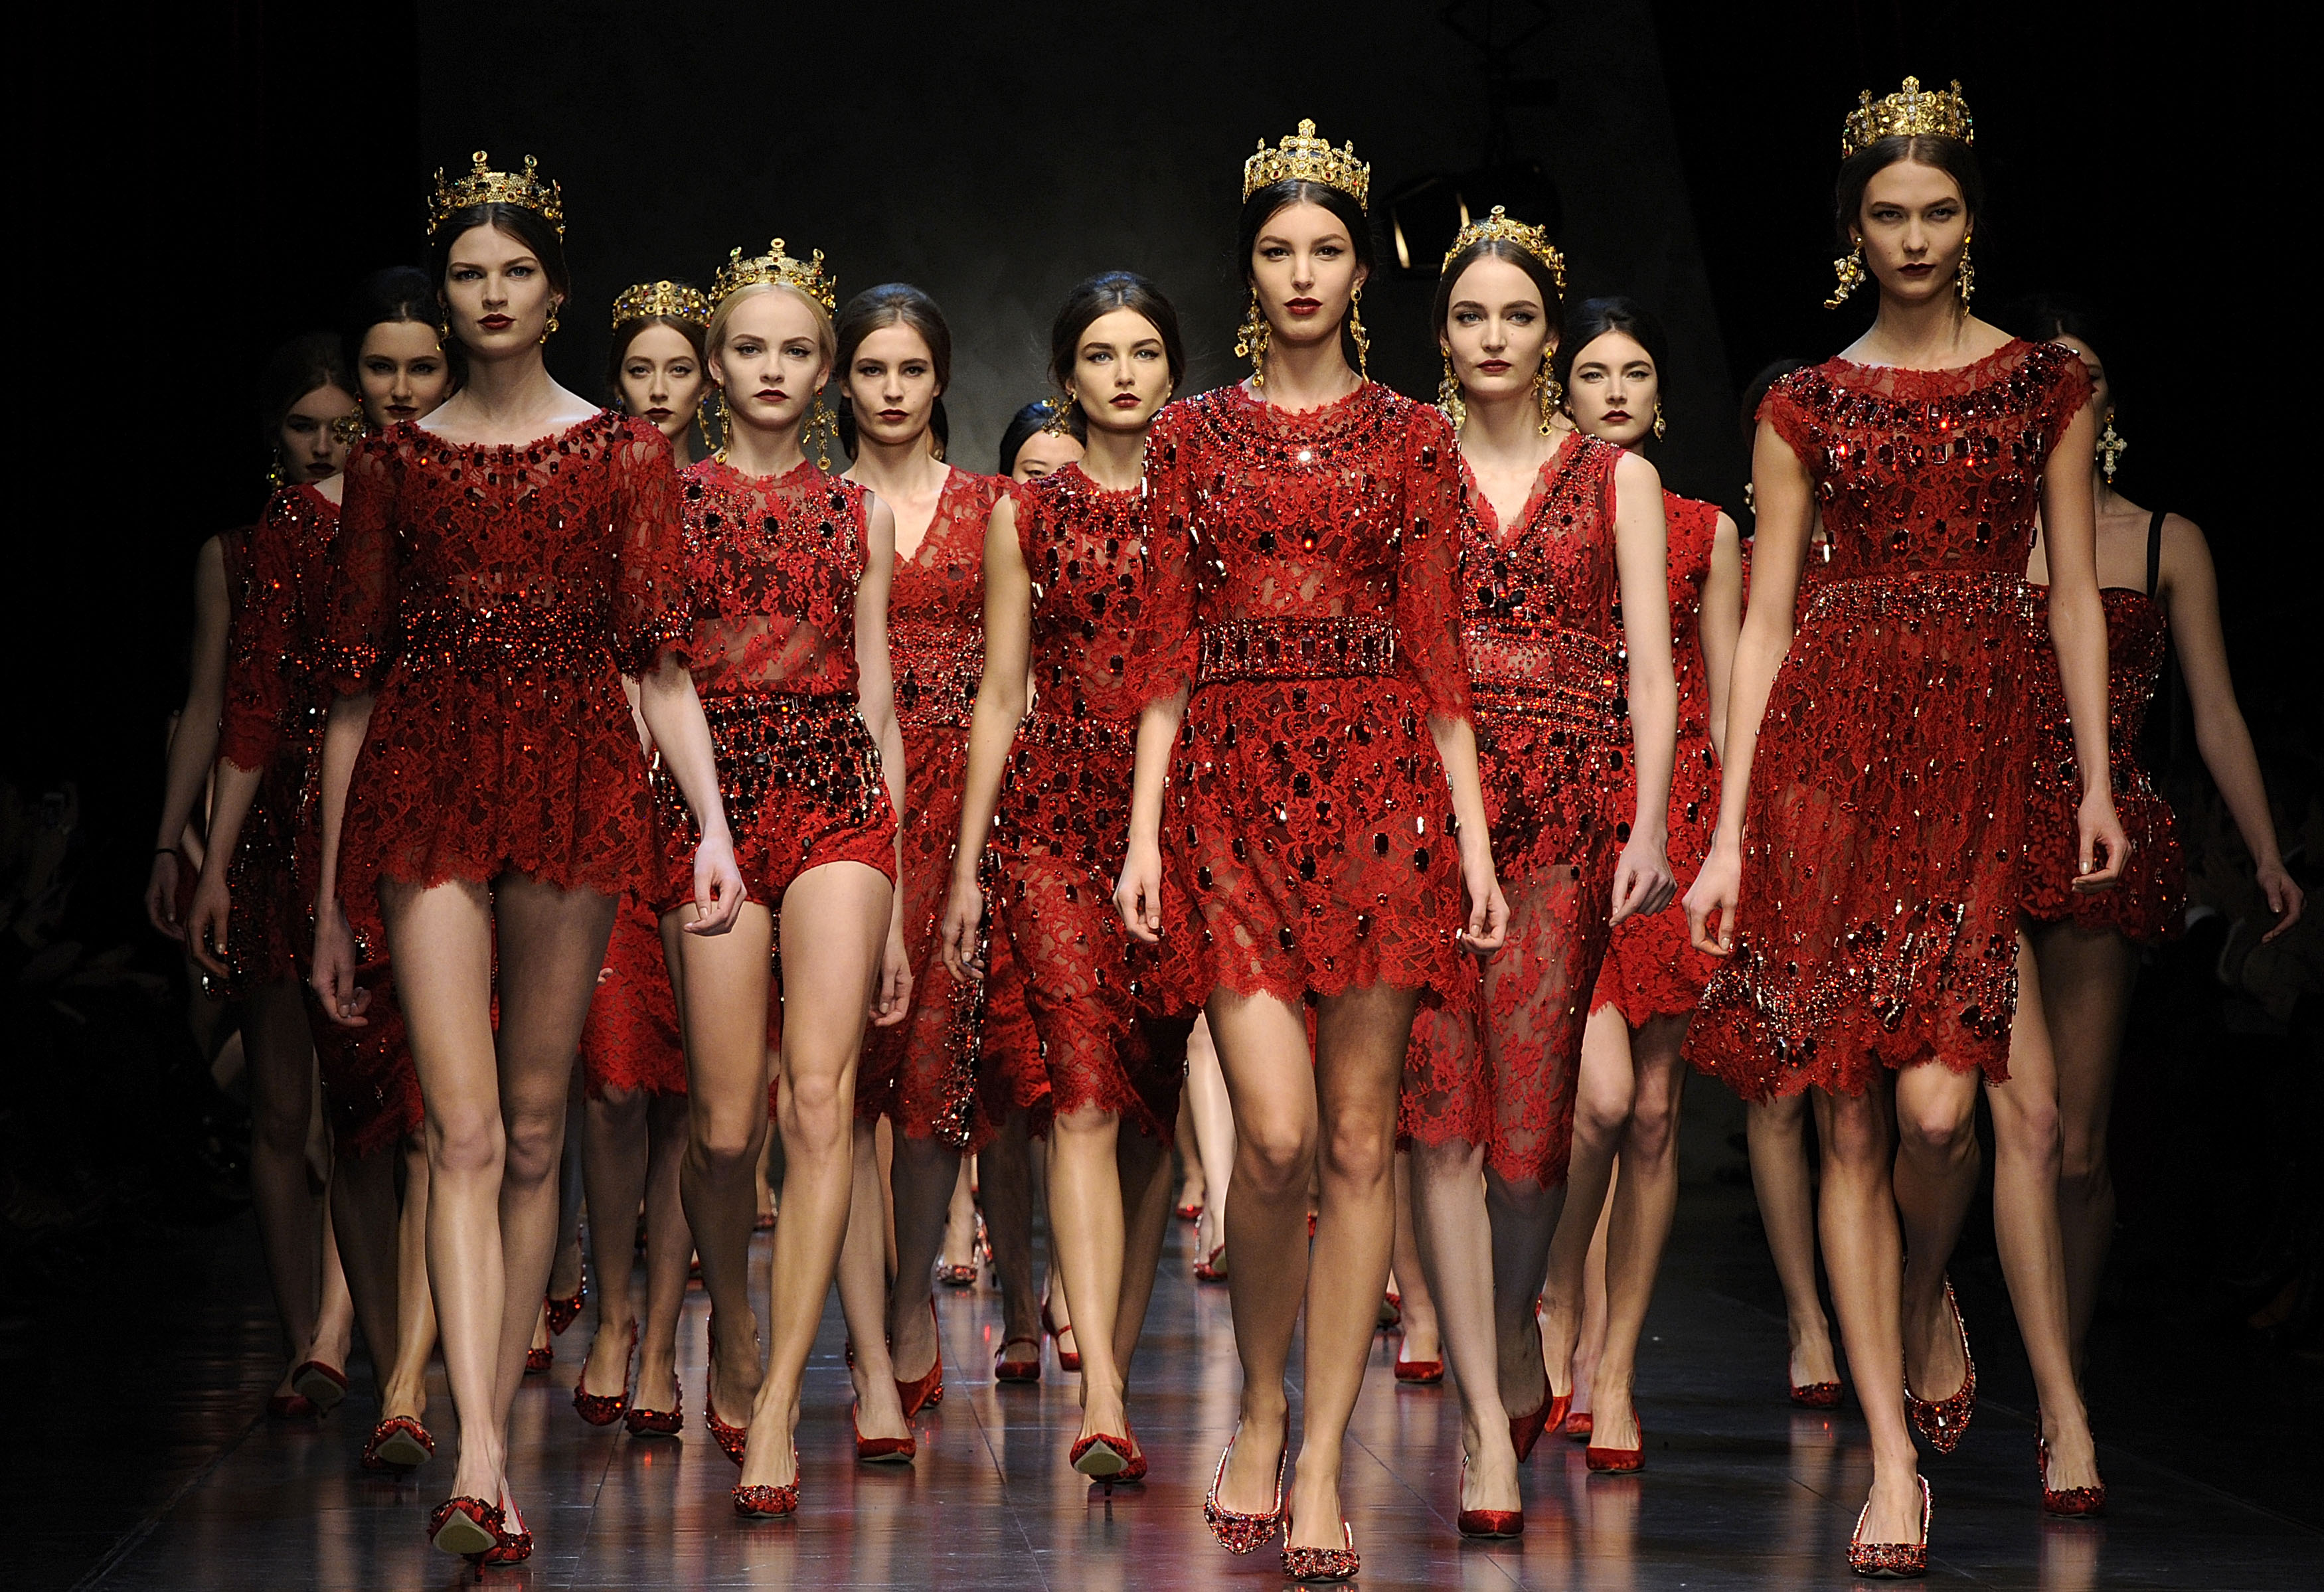 Download a free photo about Dolce Gabbana Italy Fashion. 